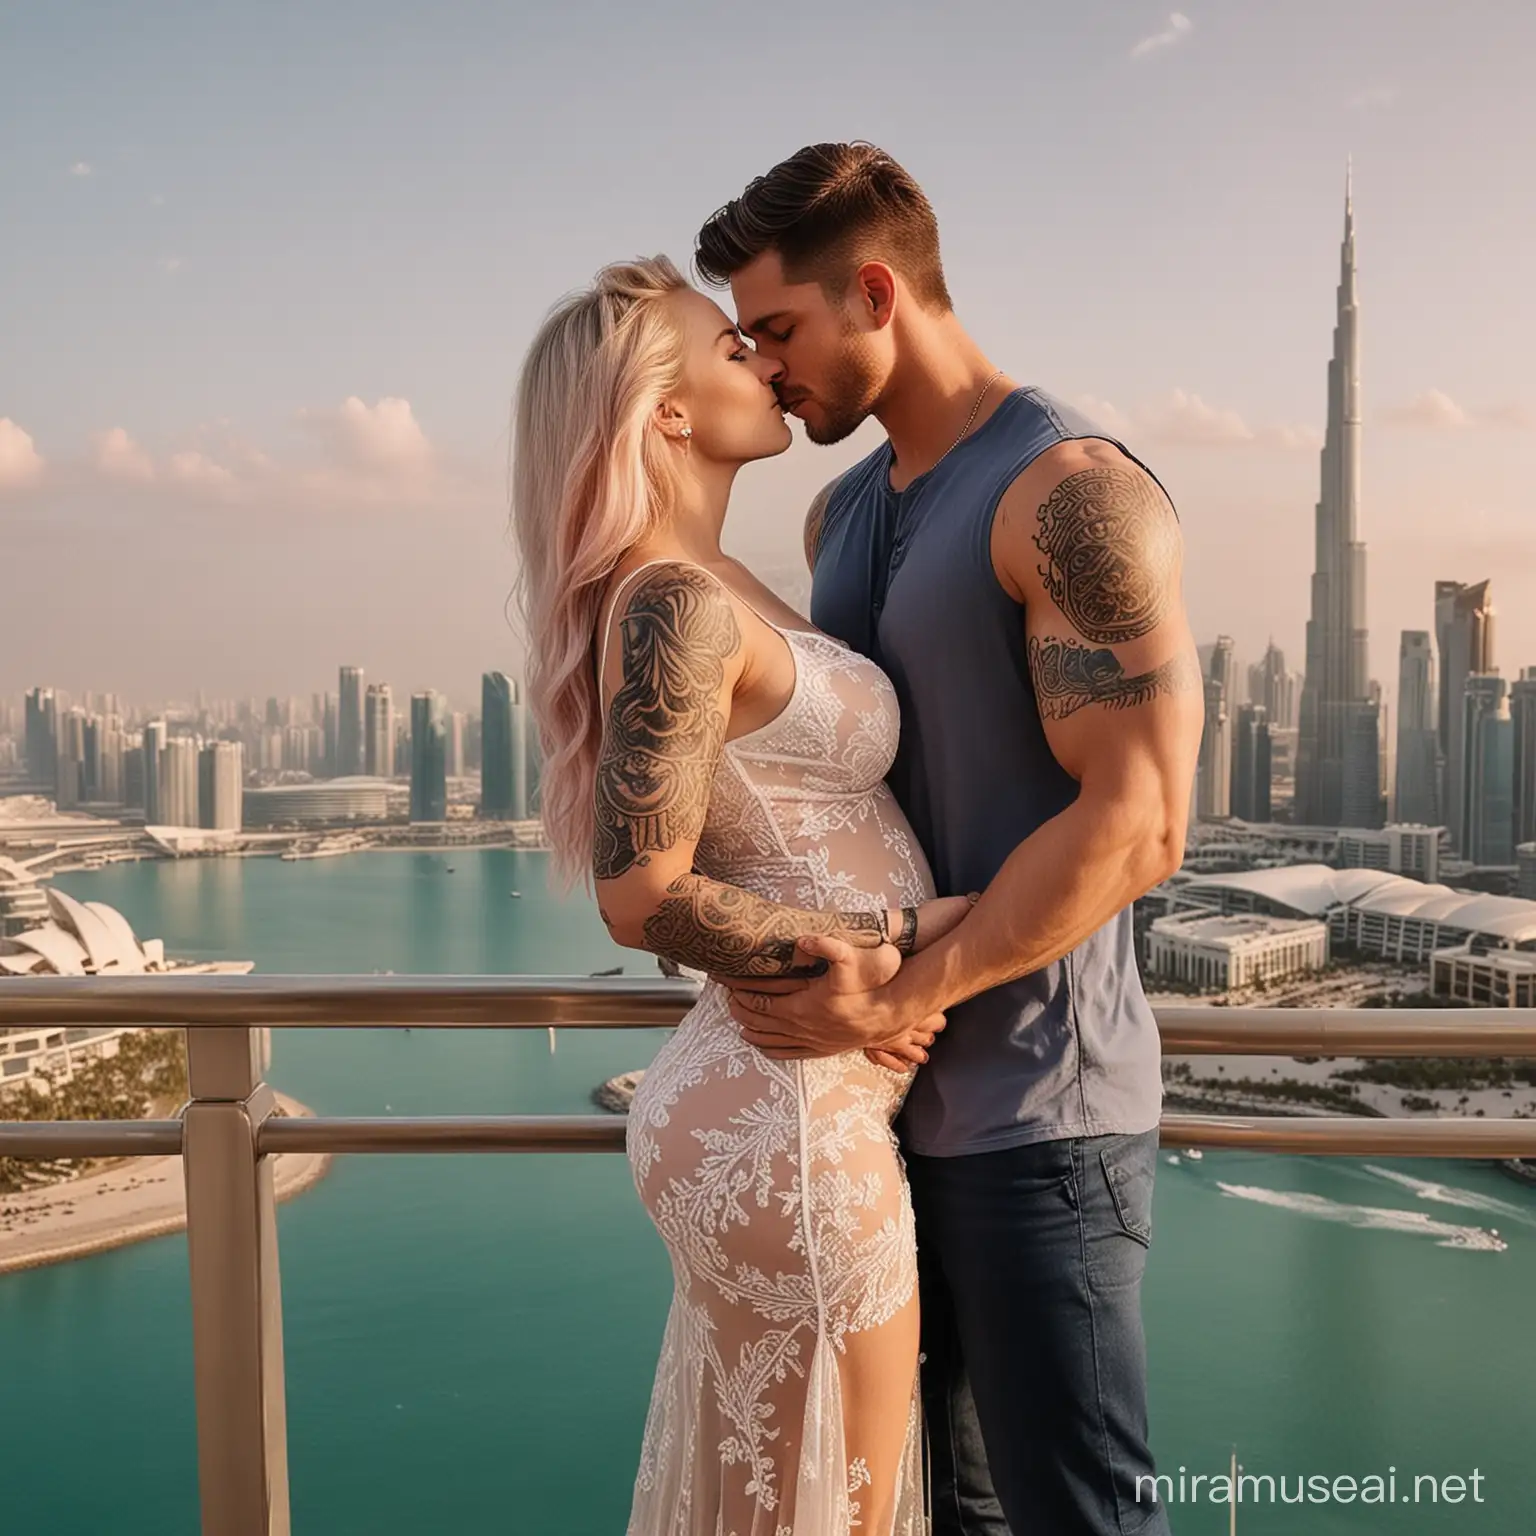 Muscular Man and Pregnant Wife Kissing at Sunrise by Mountain and Sea with Palm Trees and Dinosaur in Background